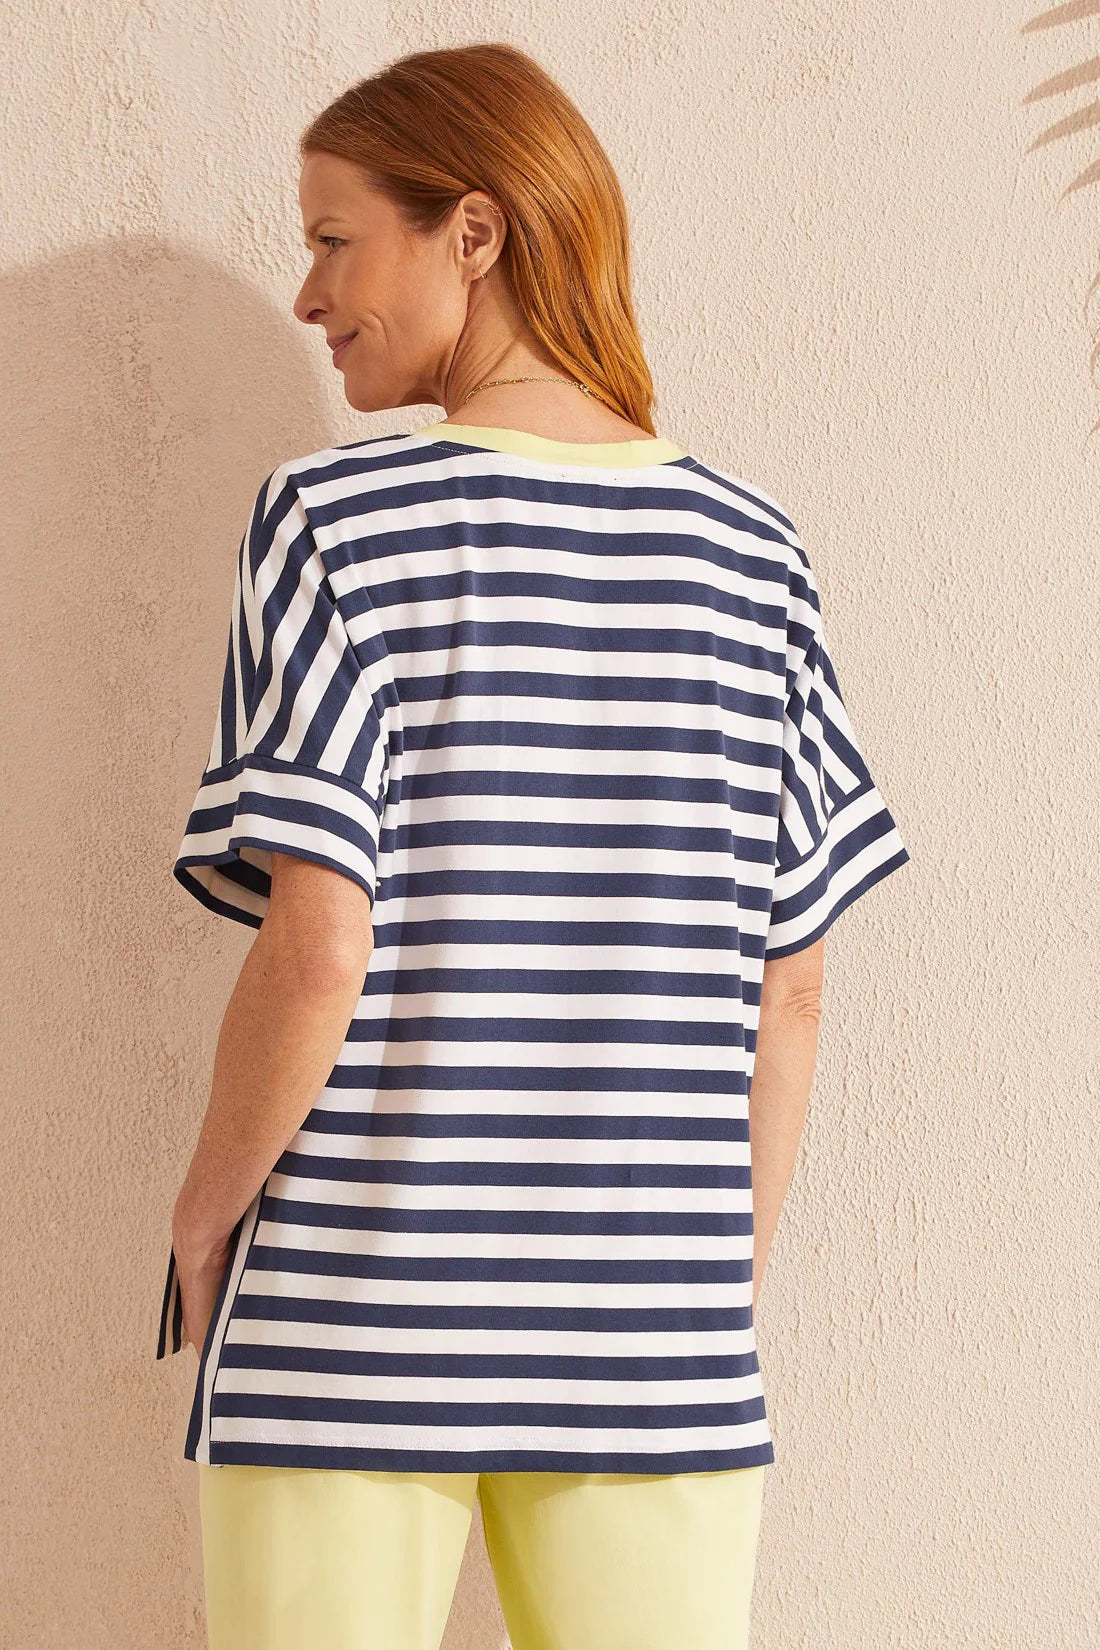 Striped Elbow Sleeve Tee by Tribal